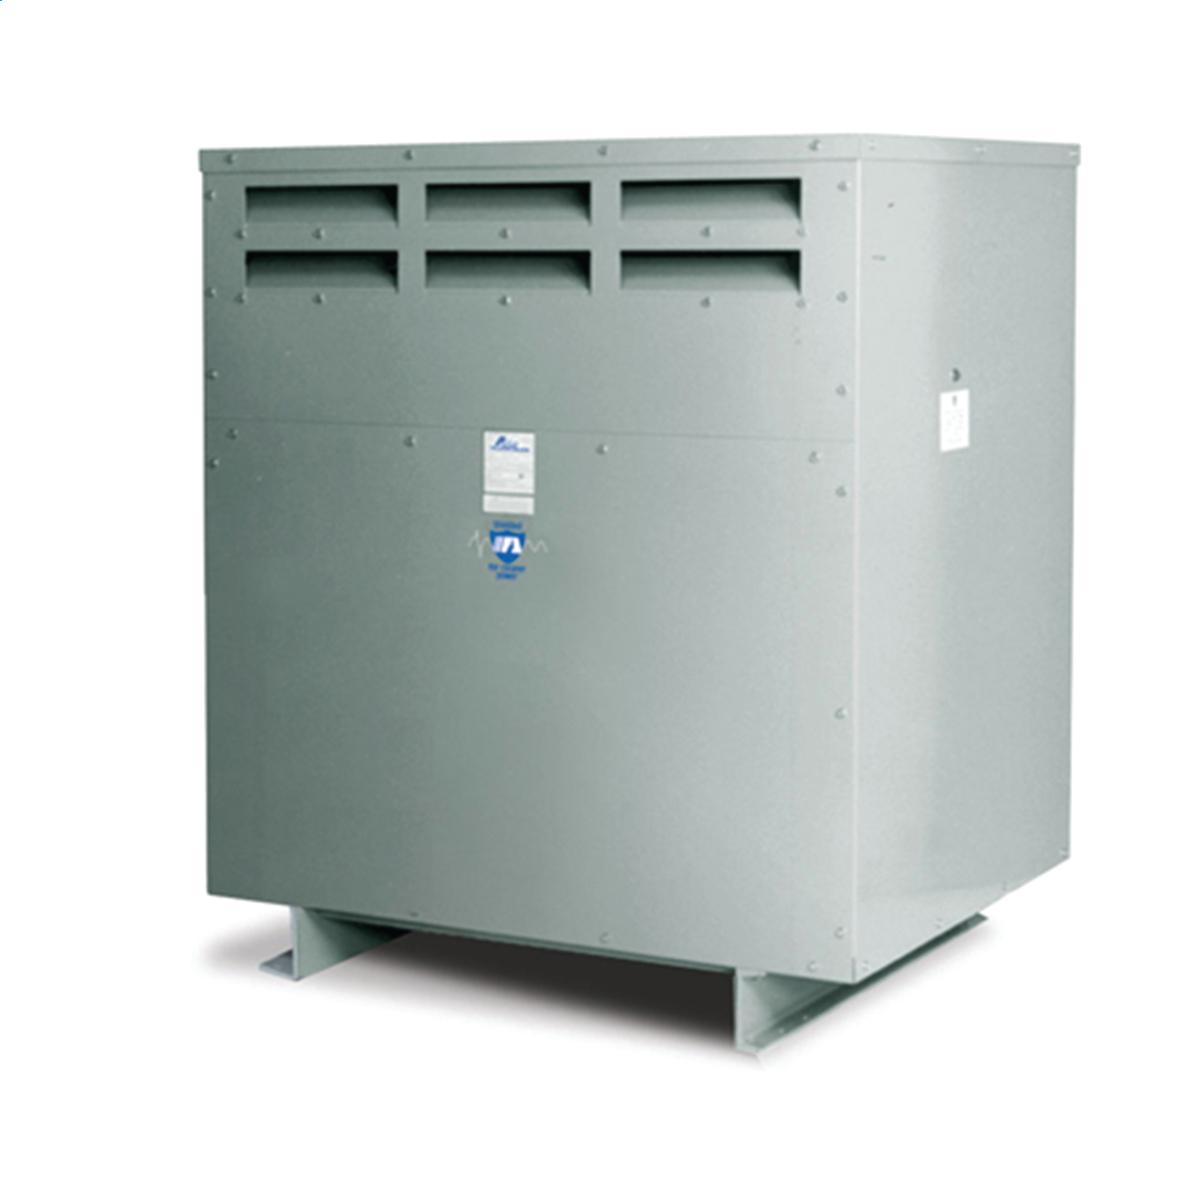 Hubbell WI002M20 Medium Voltage Transformer - Three Phase, 4160Δ - 600ΔV, 2000kVA  ; Lower operating cost over Liquid-filled ; No additional fireproofing or venting ; Long life expectancy ; Smaller, lighter easy to maintain